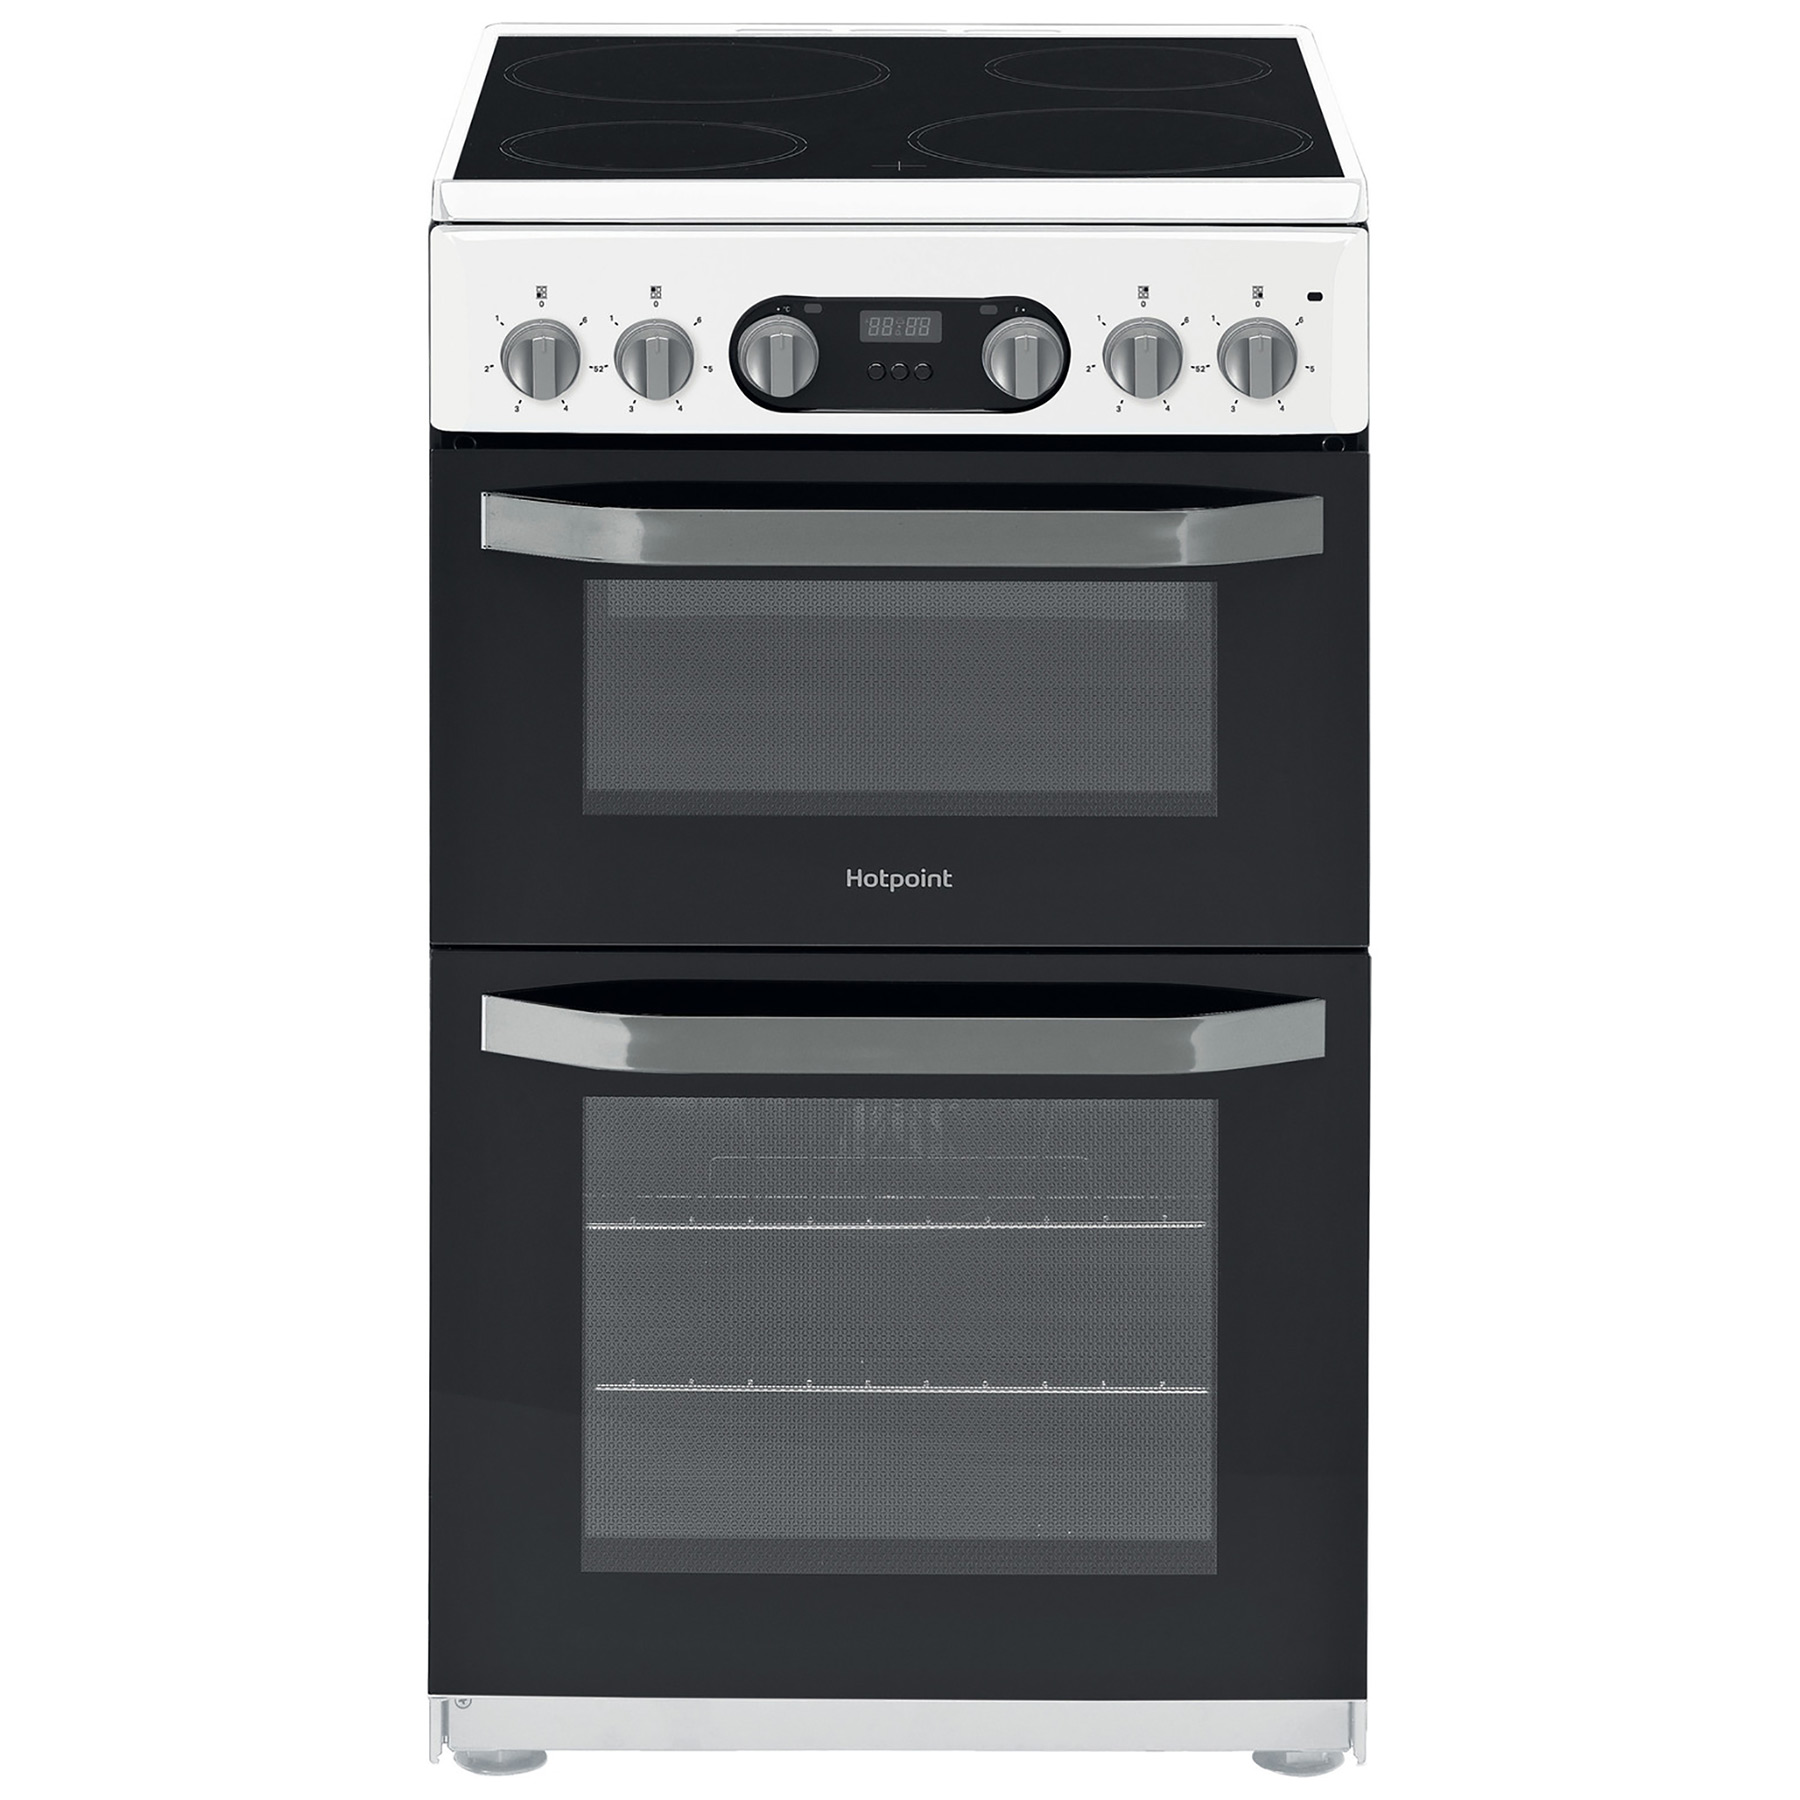 Image of Hotpoint HD5V93CCW 50cm Double Oven Electric Cooker in White Ceramic H